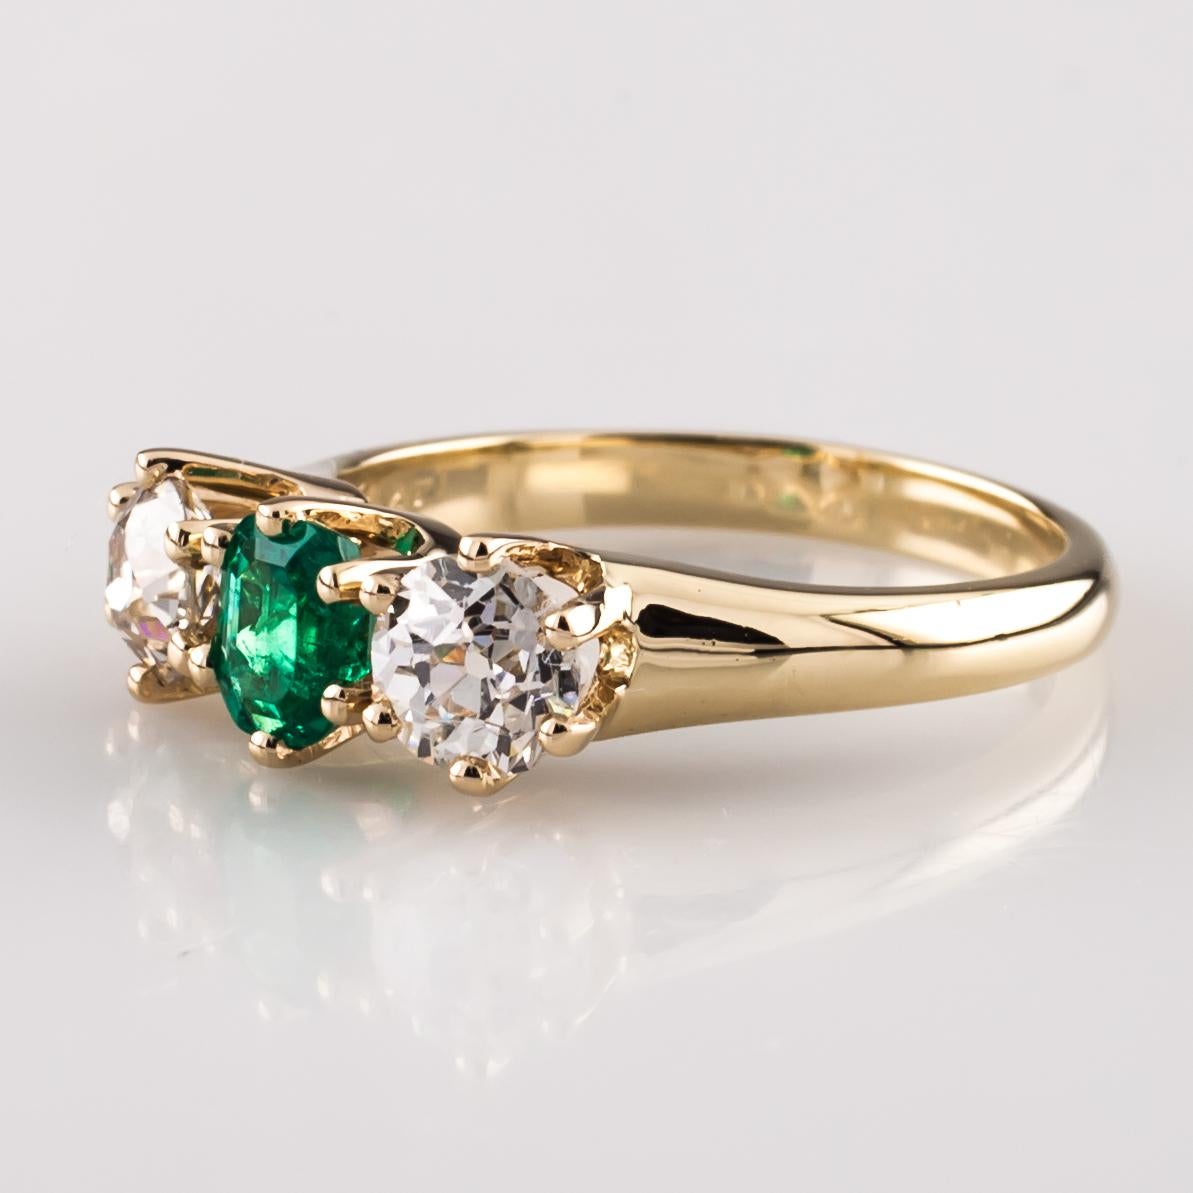 Gorgeous 14k Yellow Gold Emerald and Diamond Ring
Features One Emerald-Cut Colombian Emerald w/ Two Diamond Accent Stones
Total Emerald Weight = Approximately 0.40 ct
Total Diamond Weight = Approximately 0.75 ct
Size 5.25
Total Mass = 3.2 grams